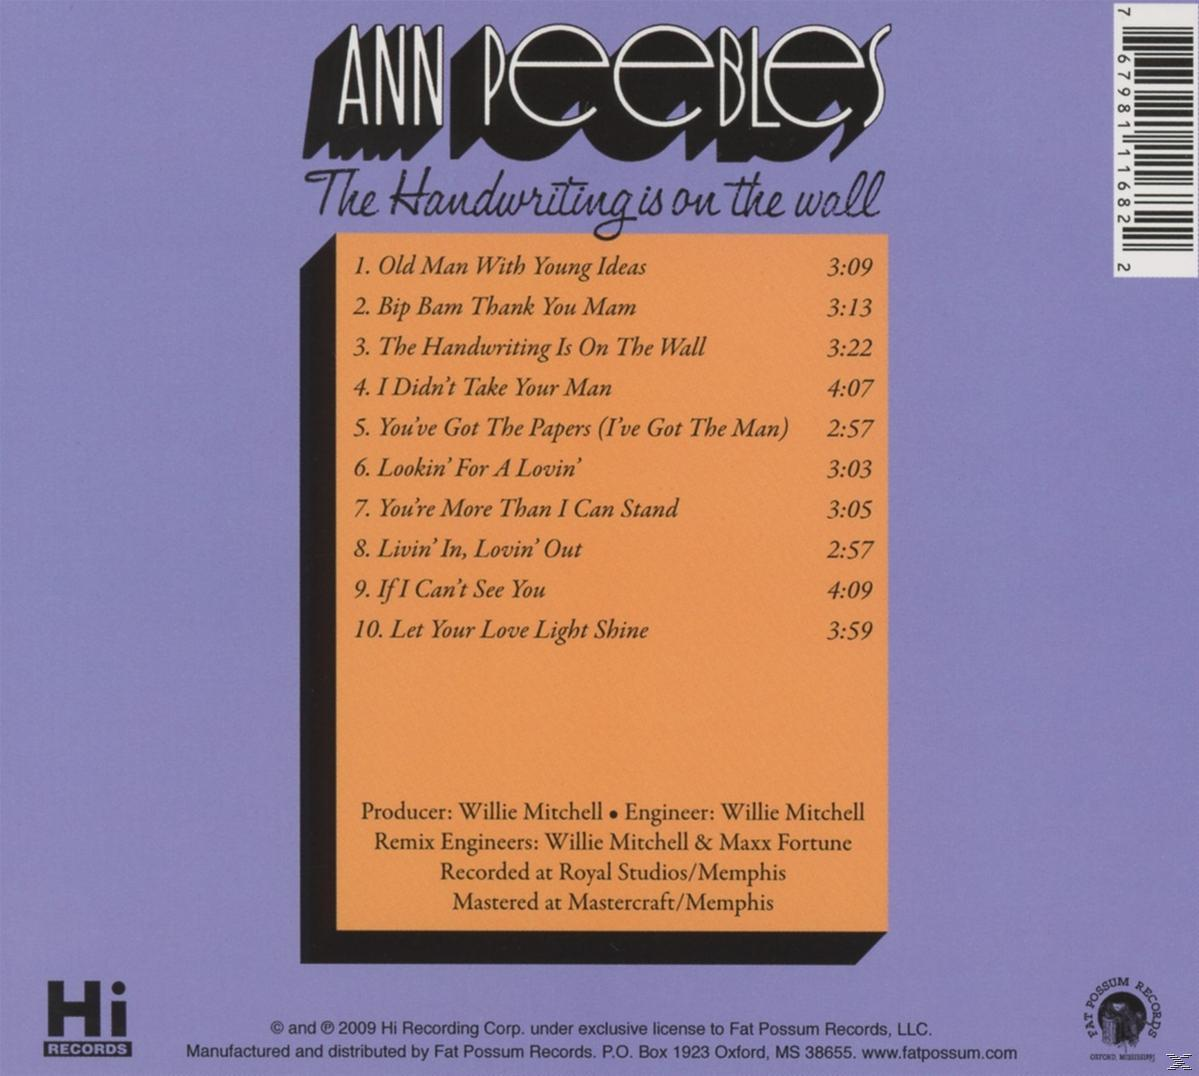 The - Ann Is The On Handwriting Peebles (CD) Wall -